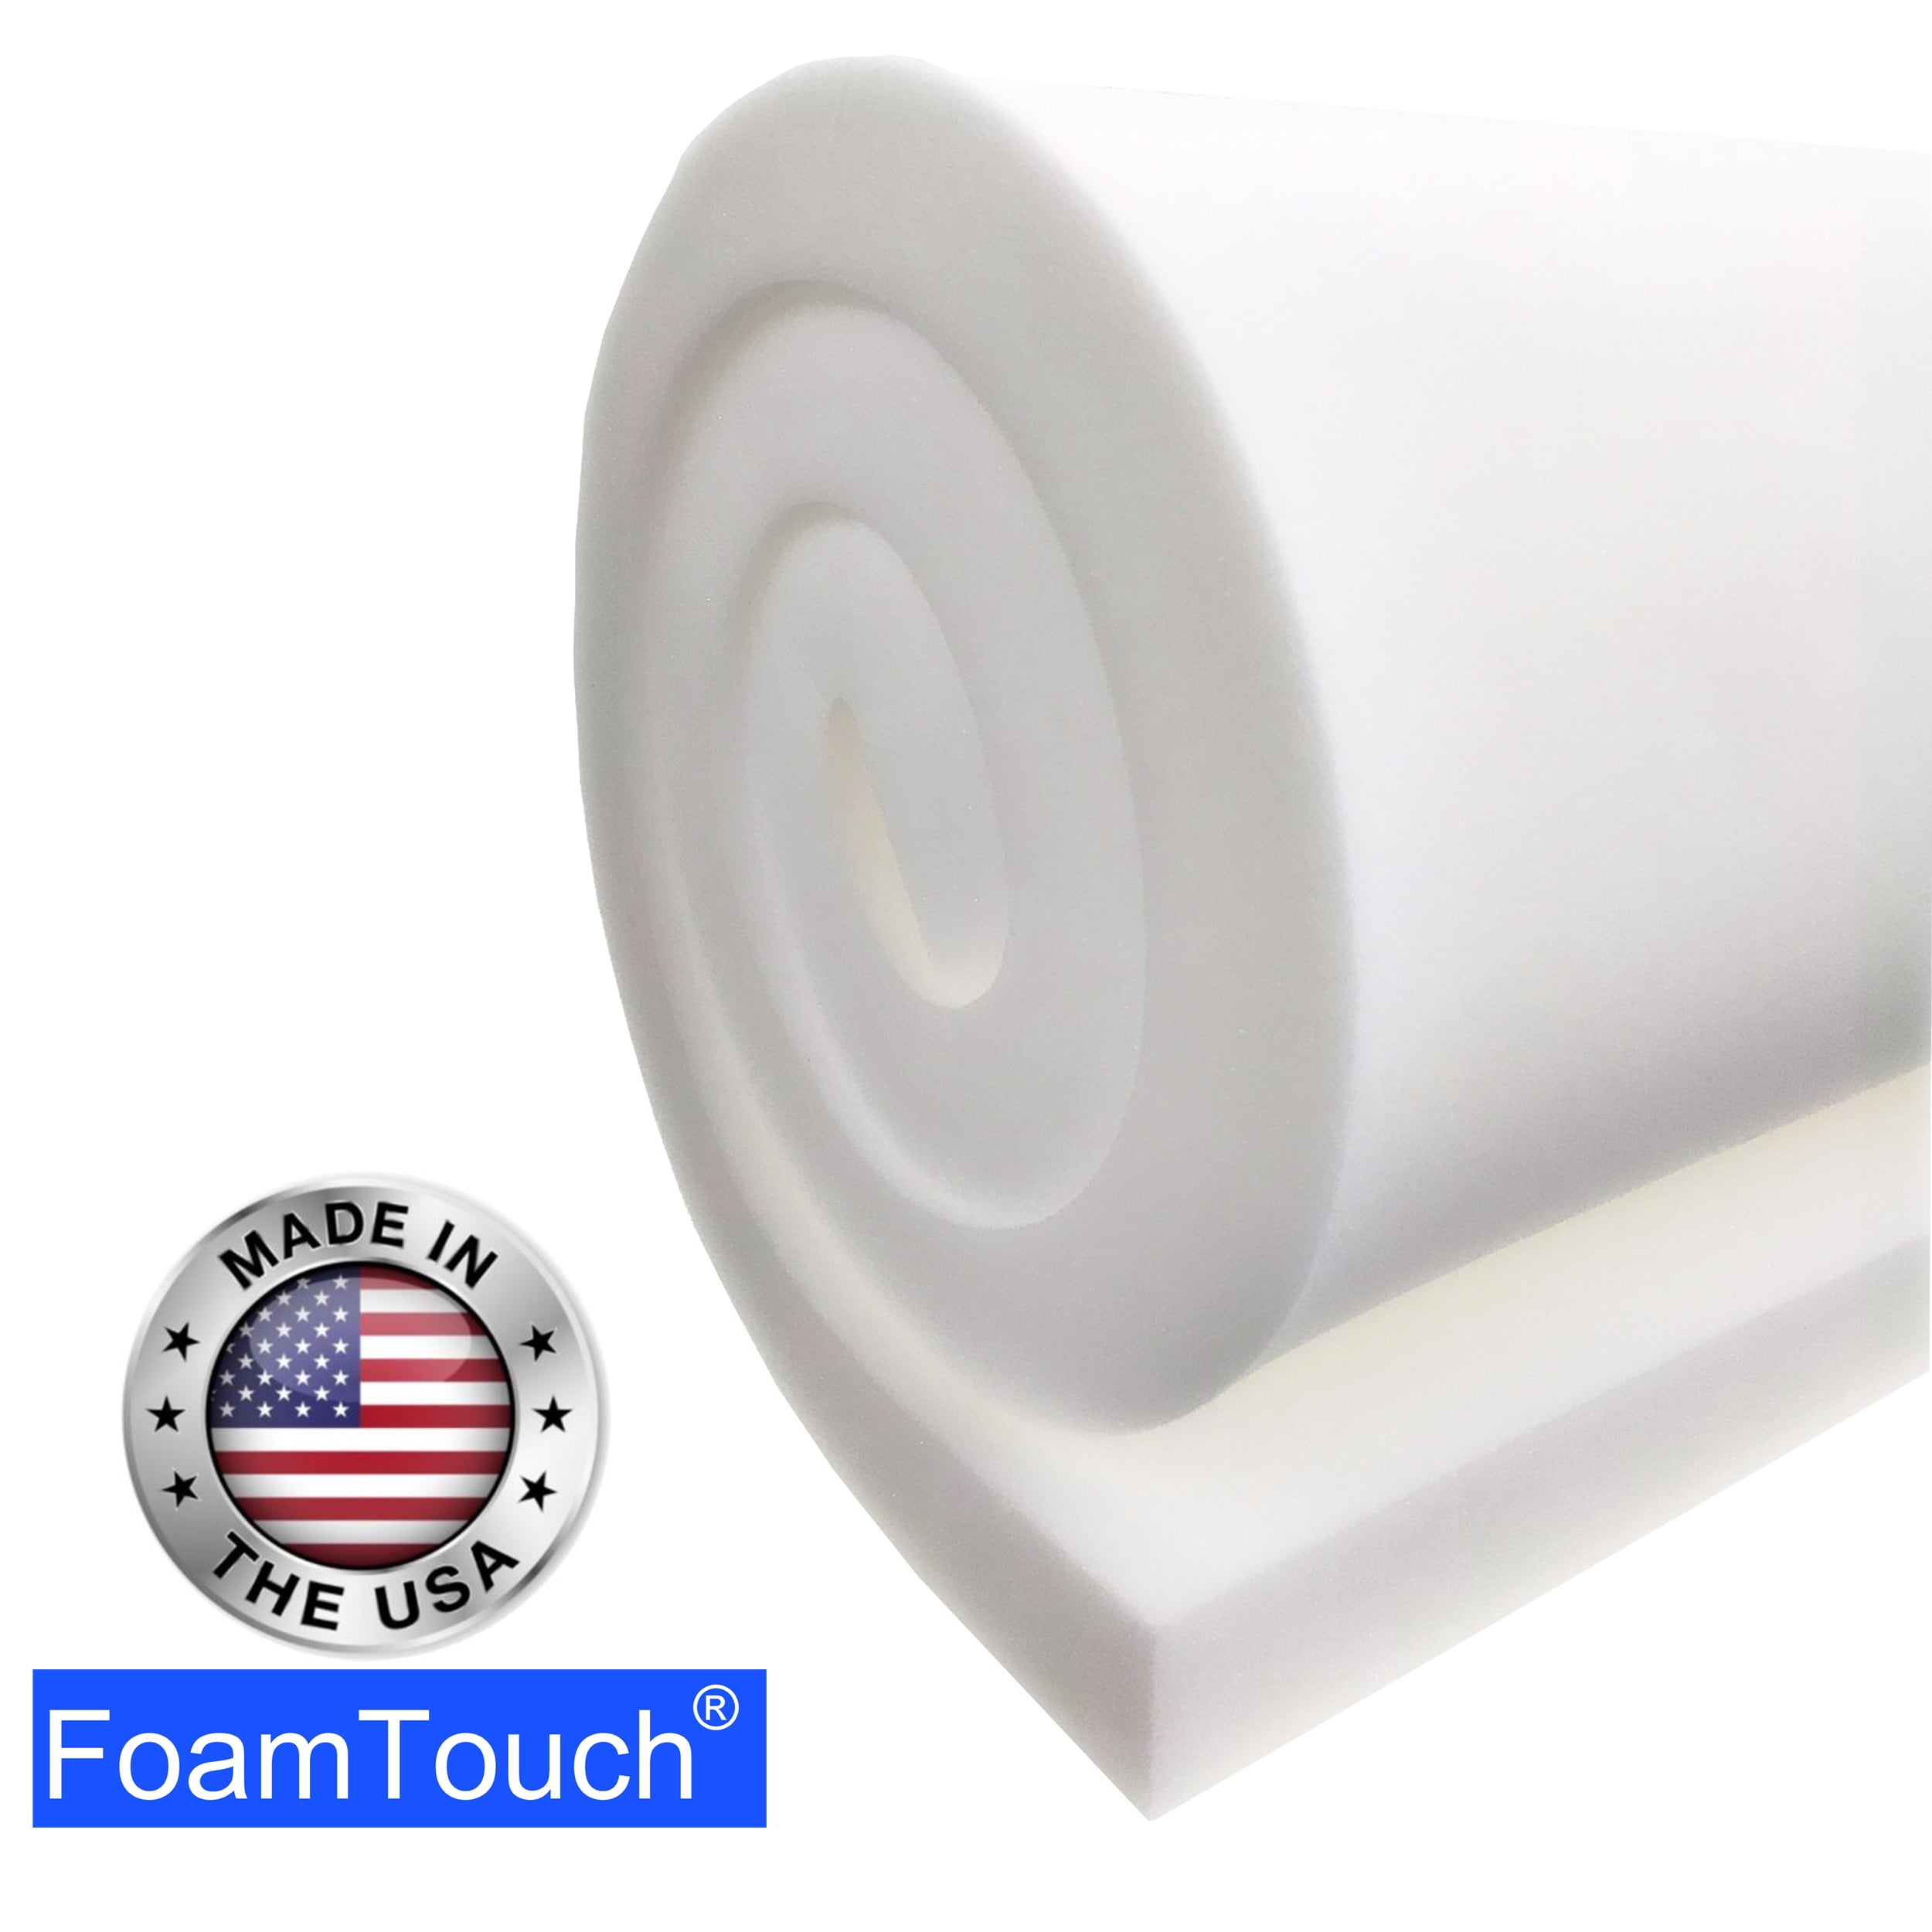 FoamFit High Density Upholstery Foam Cushion 3 Inches Thick 1.8 lb 46 ILD